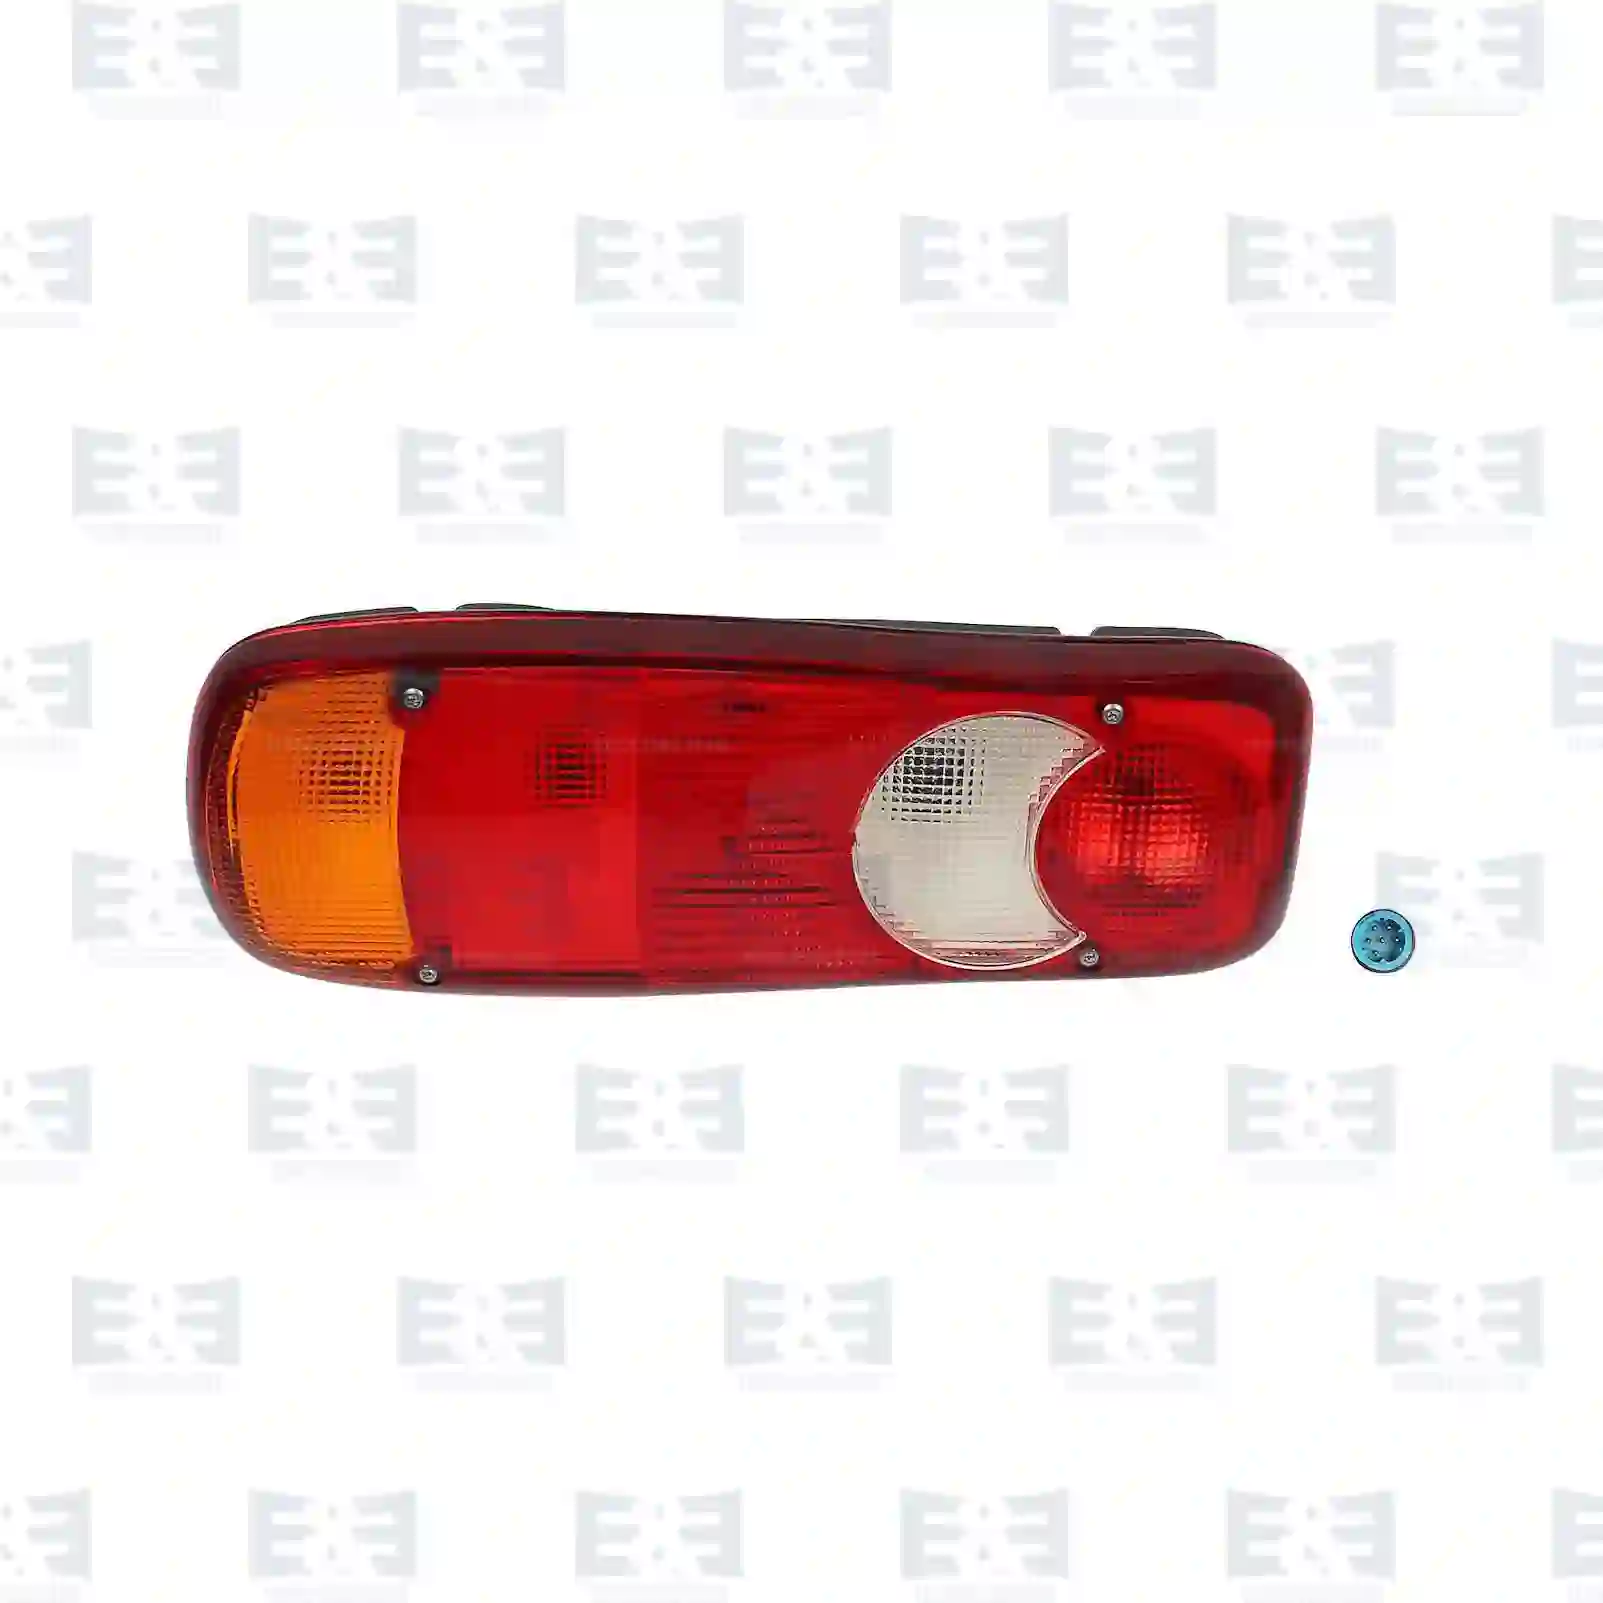 Tail lamp, without license plate lamp, 2E2299837, #YOK ||  2E2299837 E&E Truck Spare Parts | Truck Spare Parts, Auotomotive Spare Parts Tail lamp, without license plate lamp, 2E2299837, #YOK ||  2E2299837 E&E Truck Spare Parts | Truck Spare Parts, Auotomotive Spare Parts